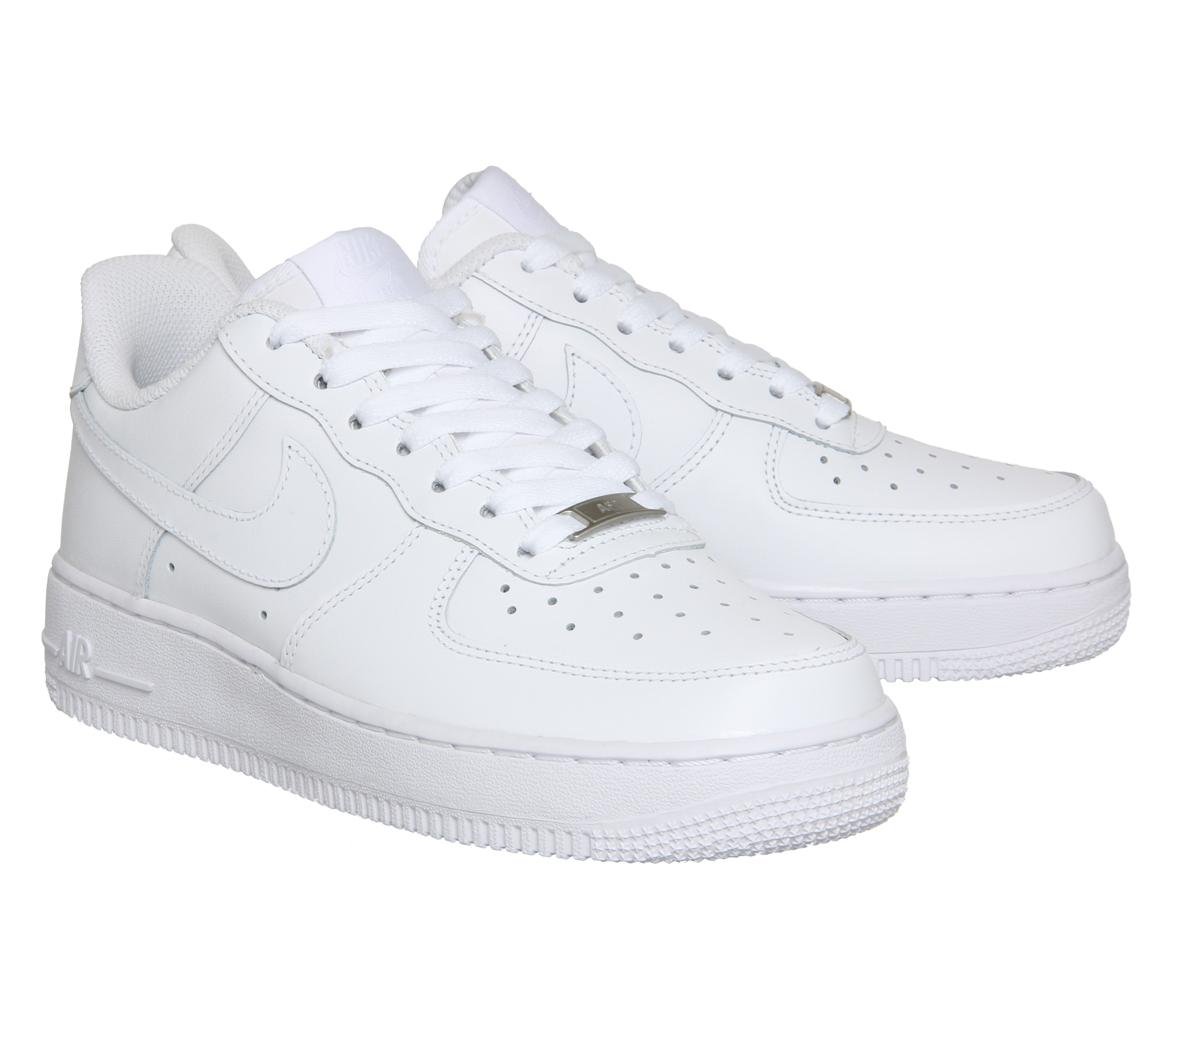 Lyst - Nike Air Force 1 Leather Sneakers in White